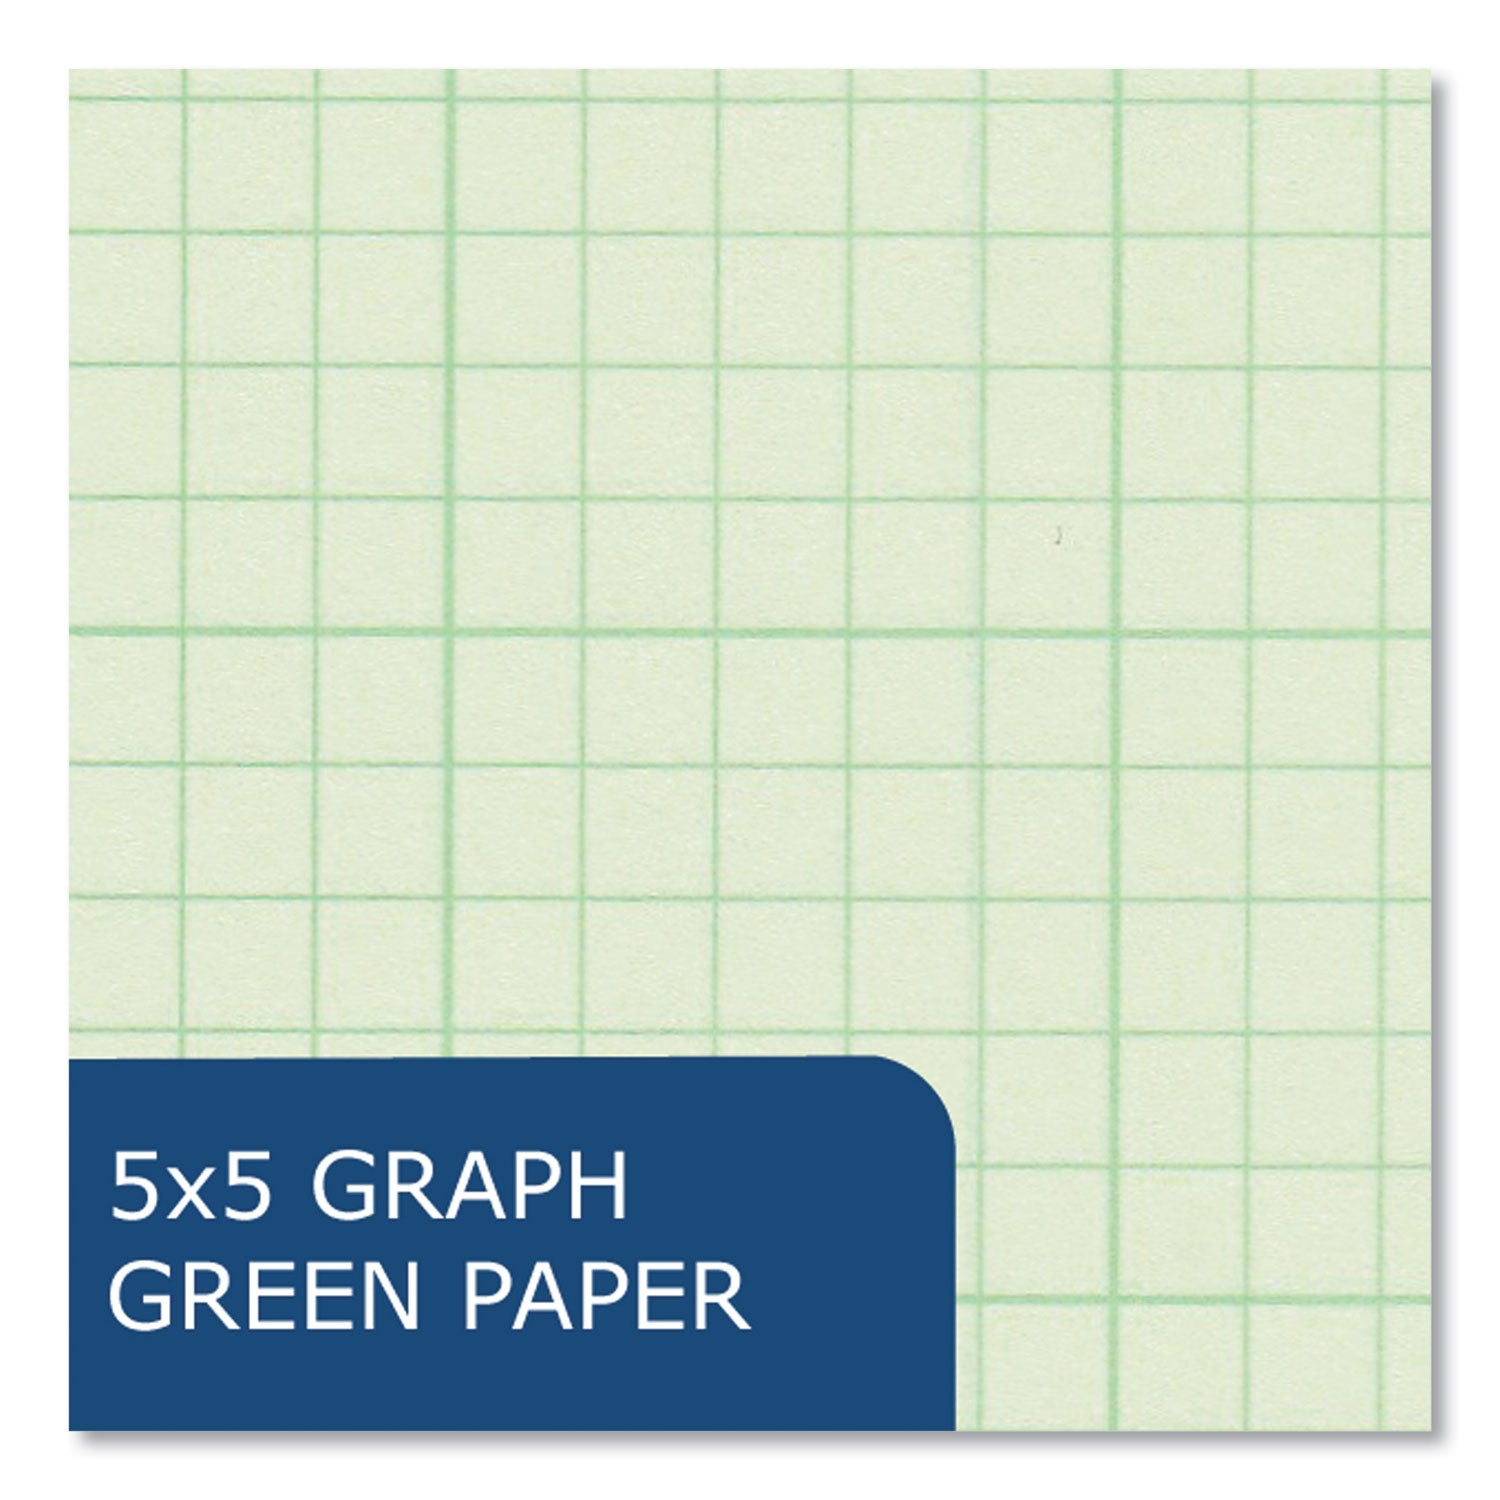 engineer-pad-125-margin-quad-rule-5-sq-in-1-sq-in-200-lt-green-85x11-sheets-pad-12-ct-ships-in-4-6-business-days_roa95589cs - 5